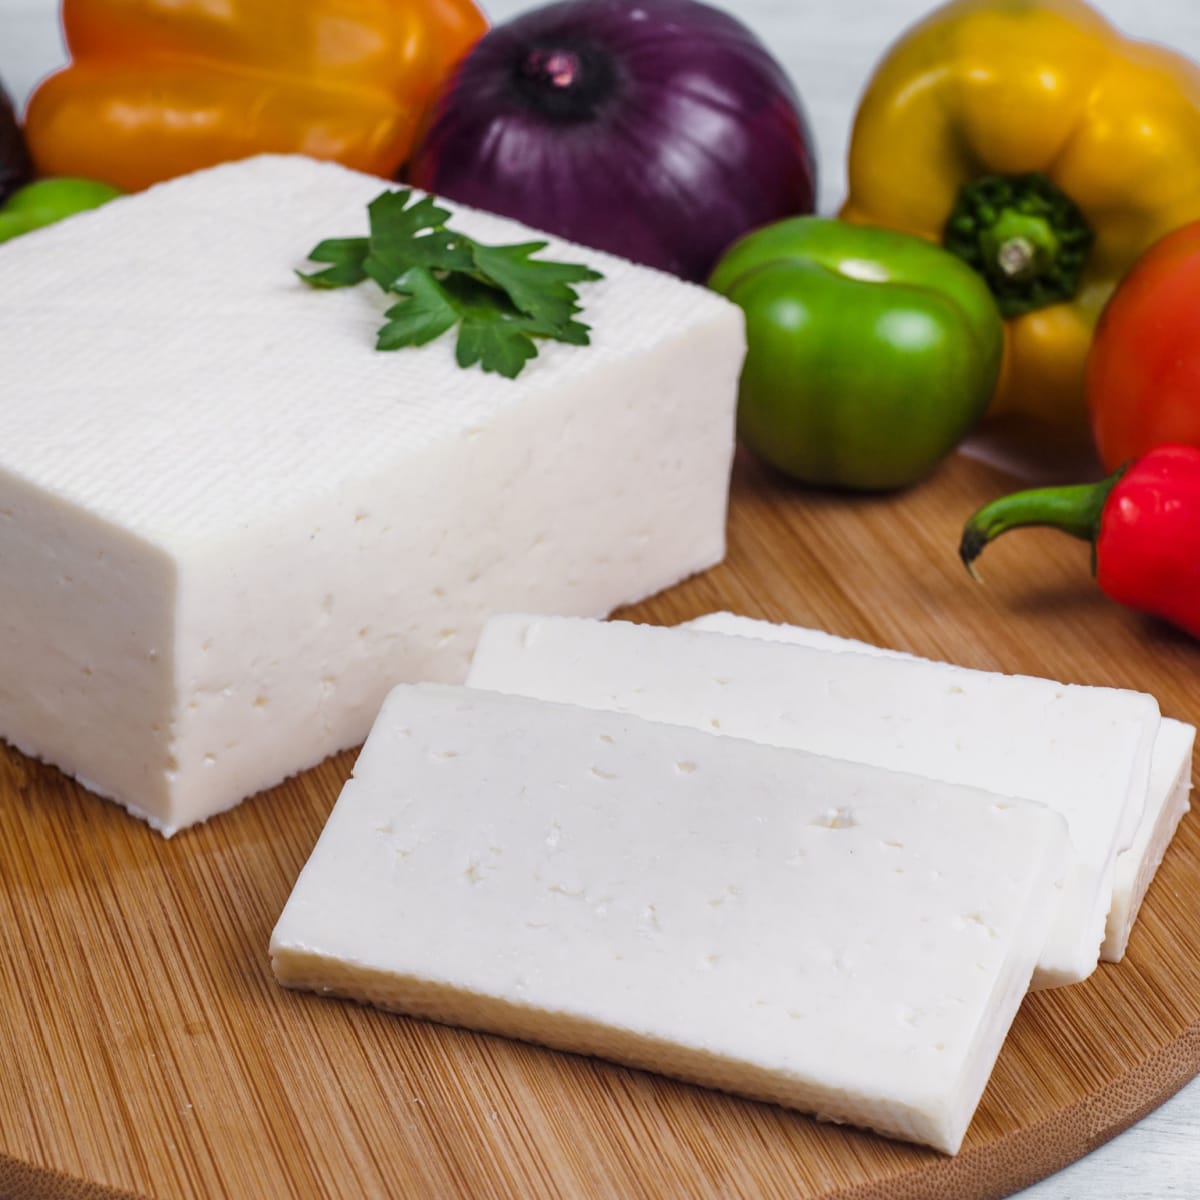 Slices of Queso Panela on a Wooden Cutting Board